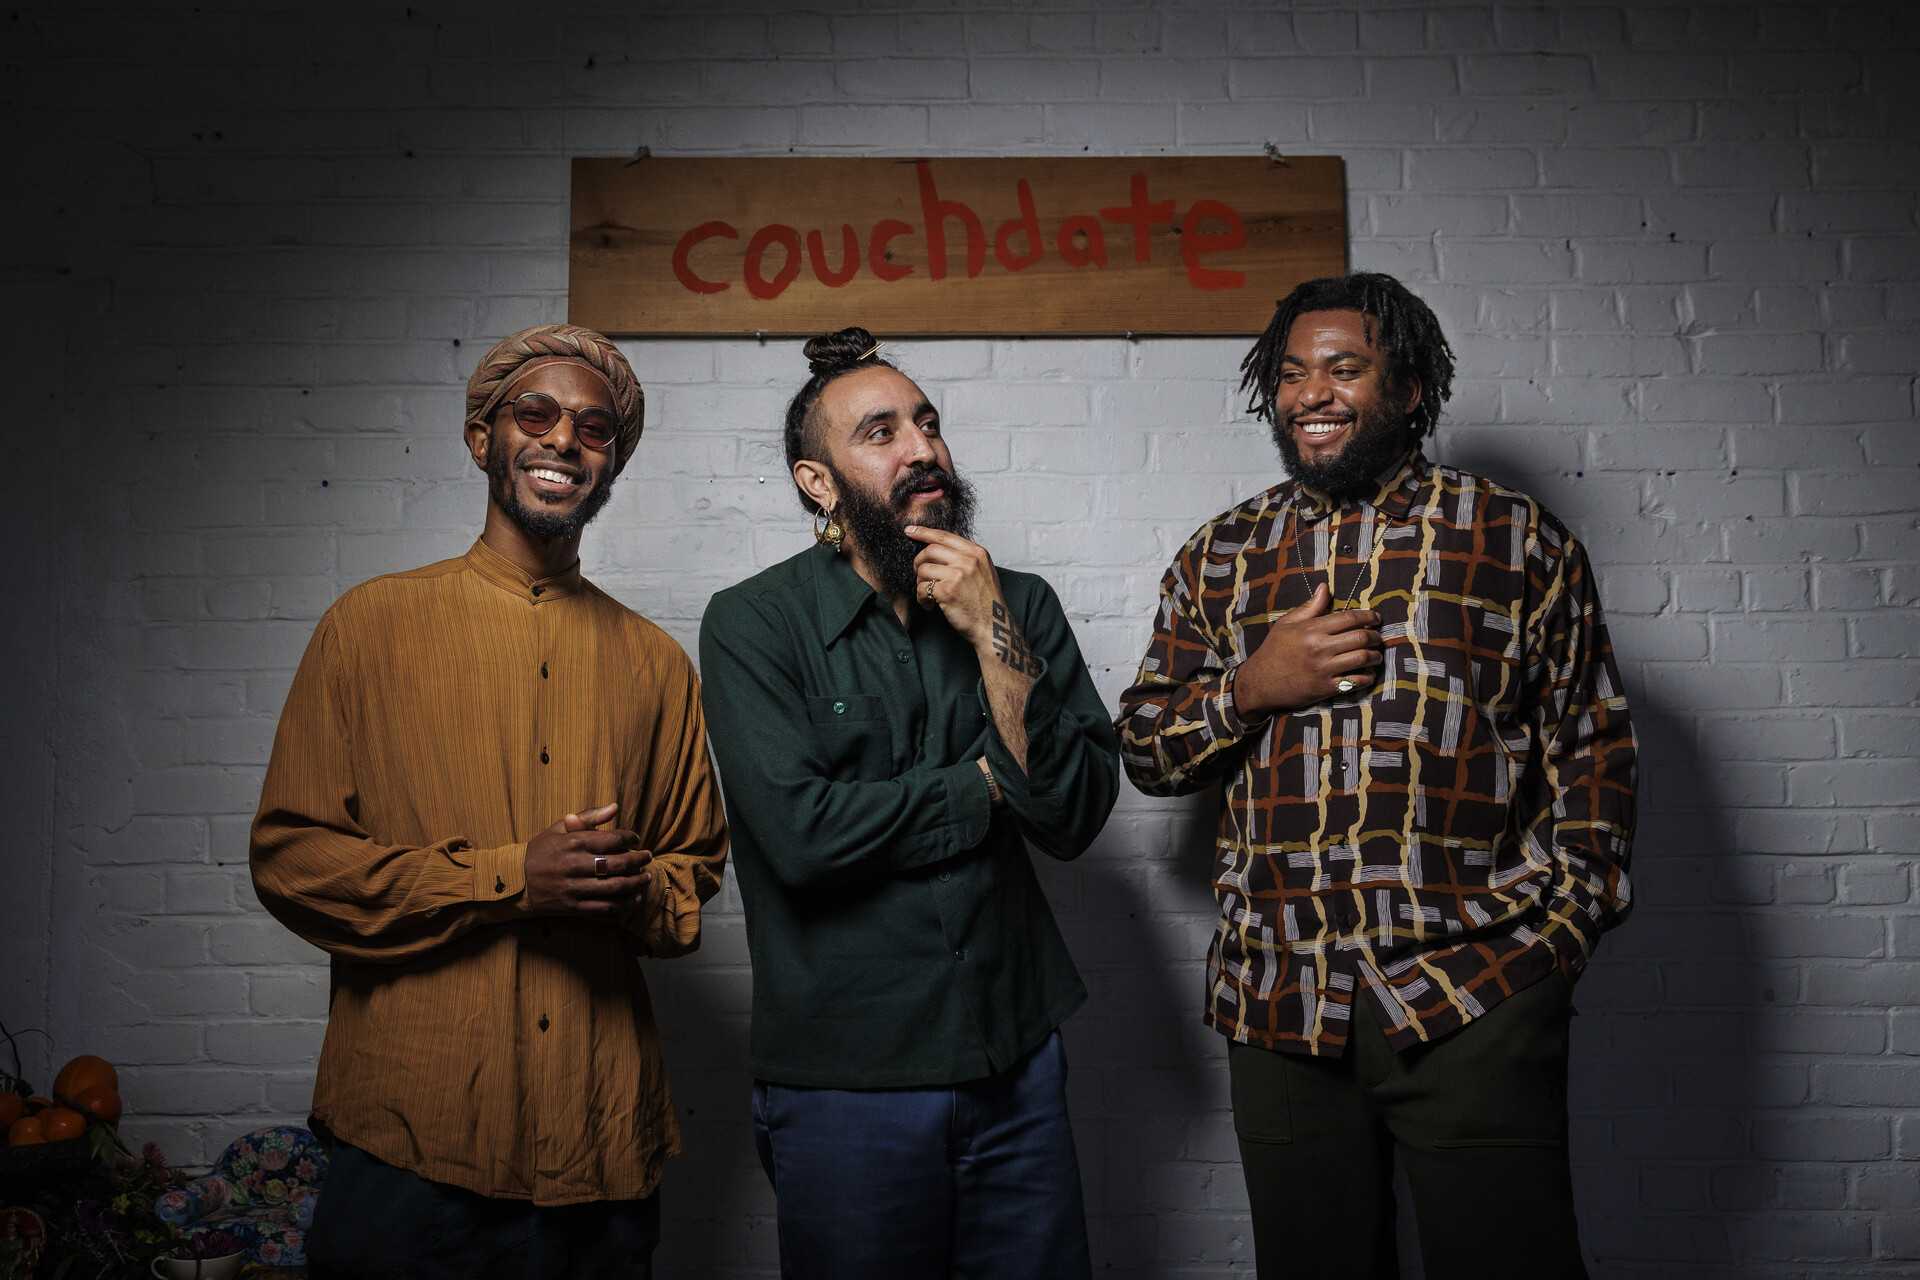 Three men stand in front a white wall that has a sign that reads "couchdate" on it.